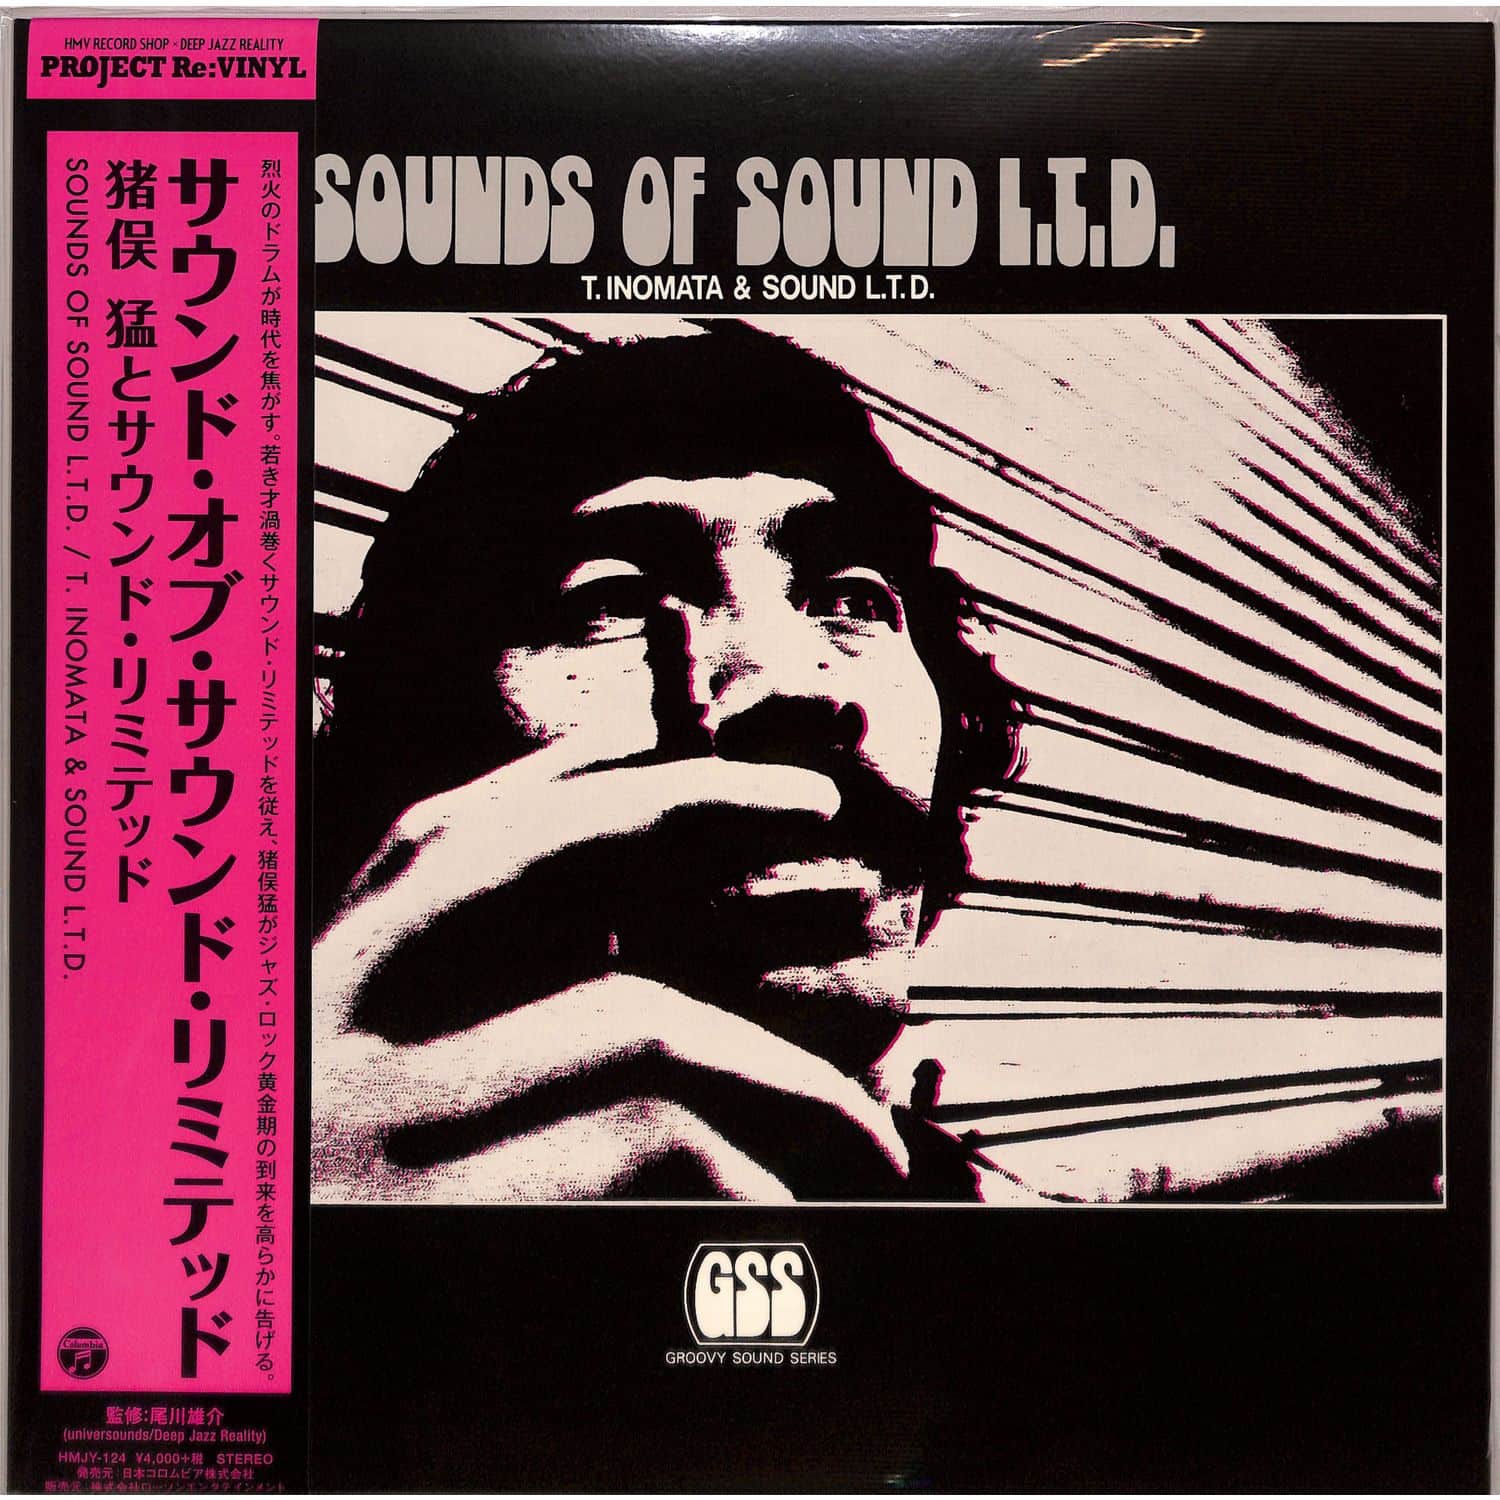 Takeshi Inomata / Sound Limited - SOUNDS OF SOUND L.T.D. 